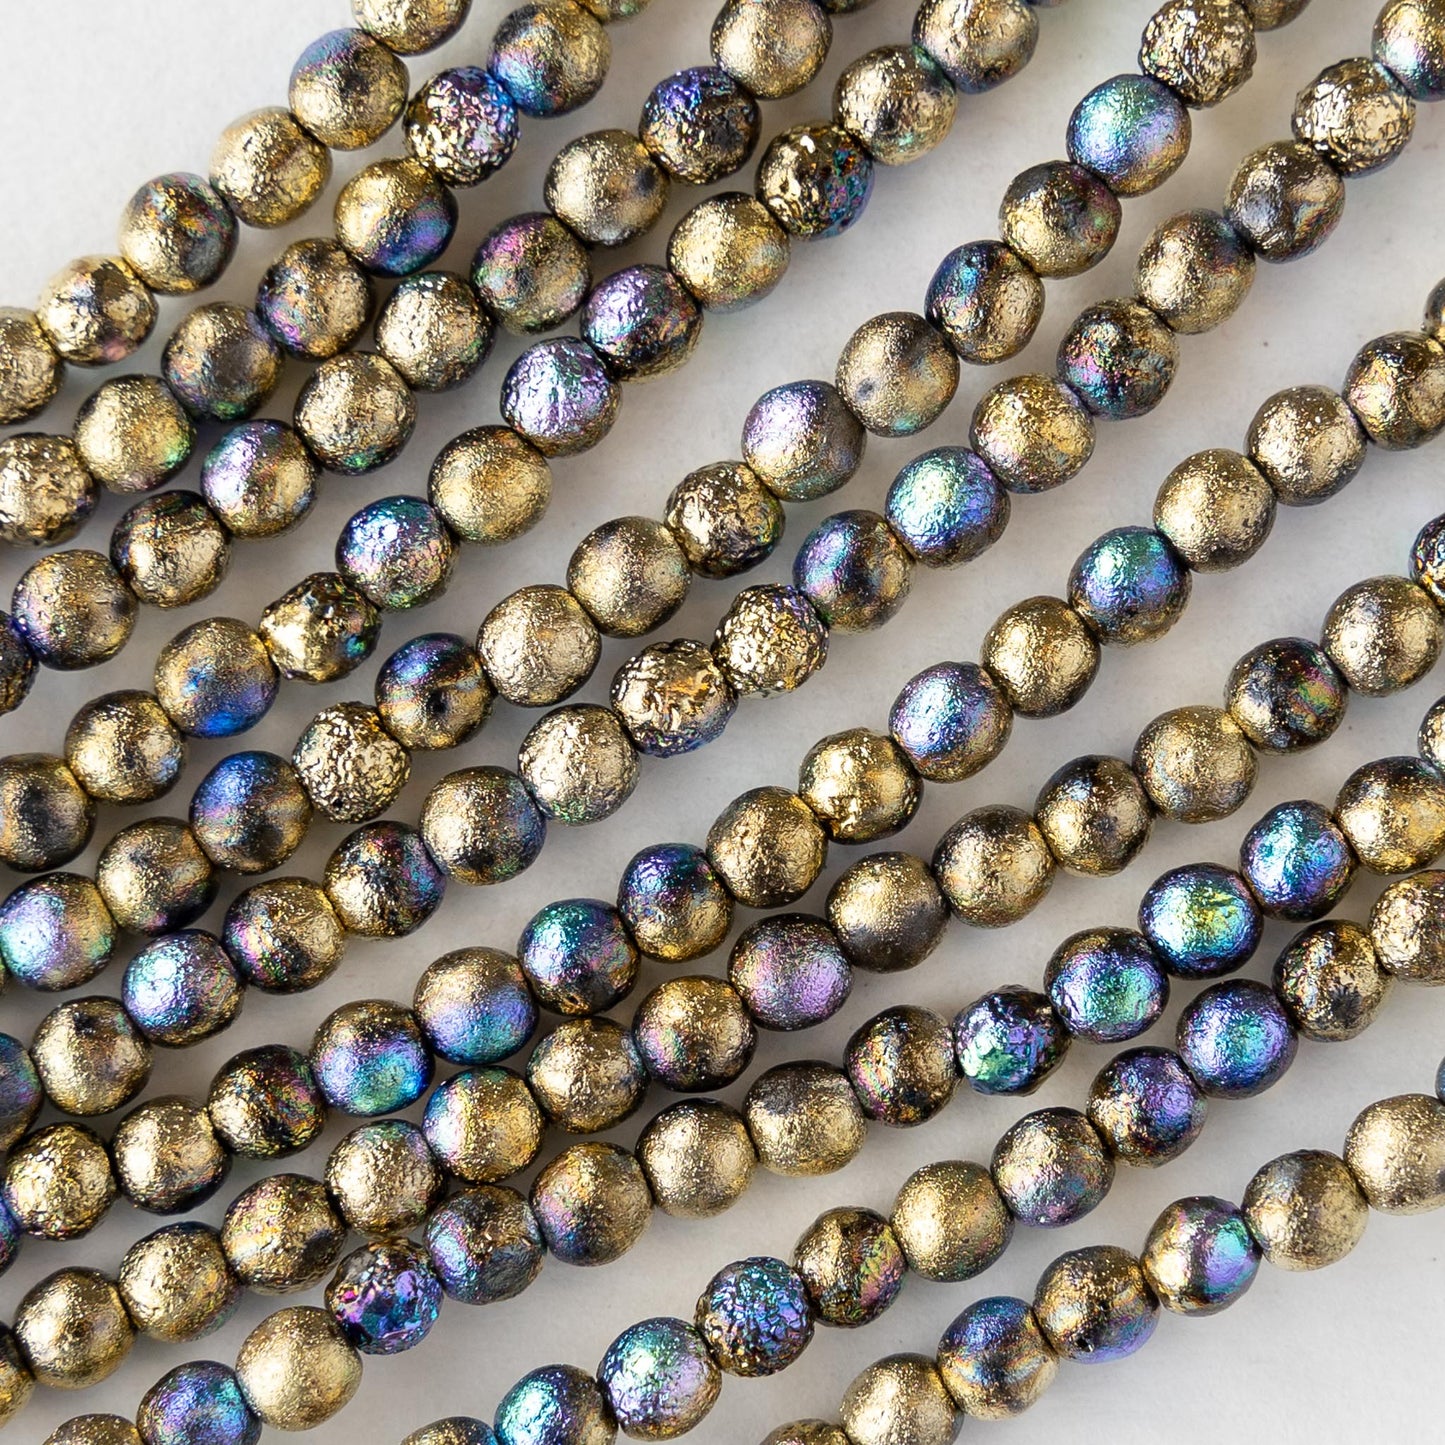 4mm Round Glass Beads - Etched Gold Ore AB - 50 Beads